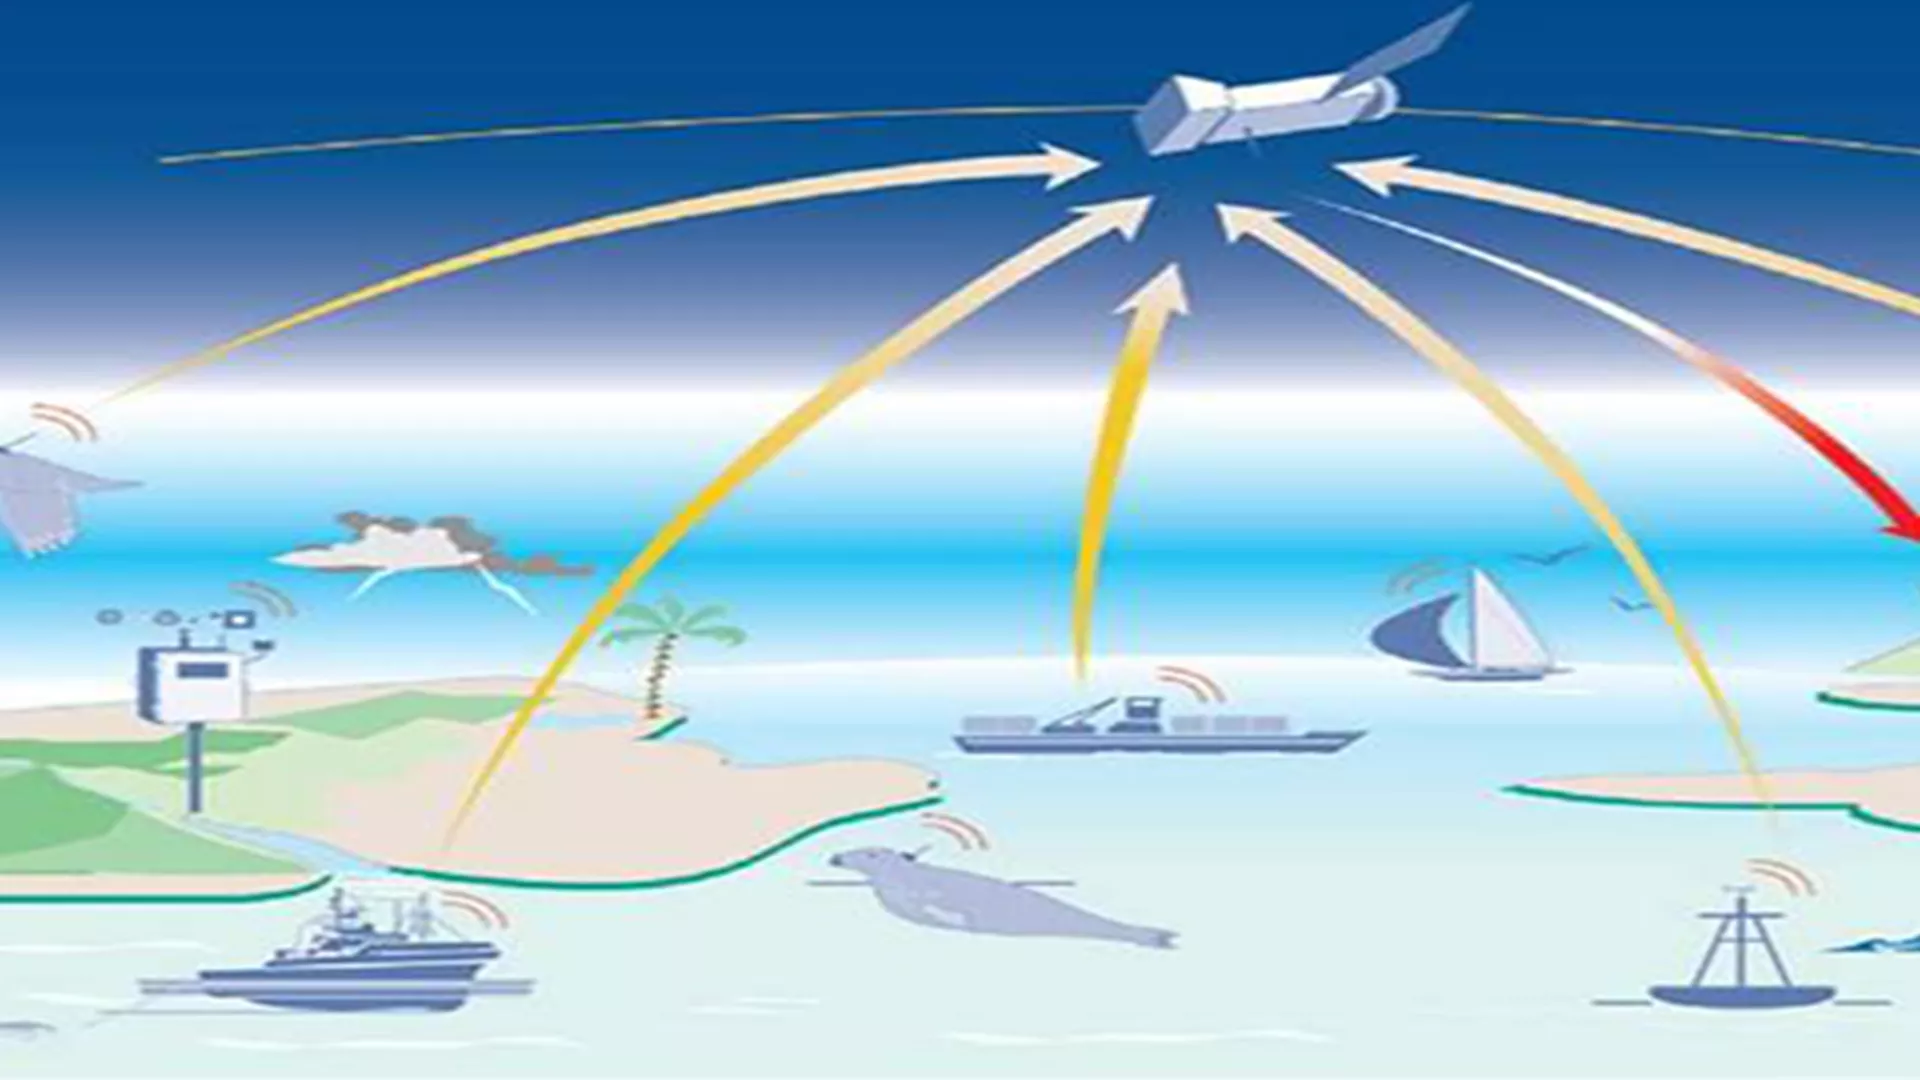 A drawing of the ARGOS satellite system connecting to various beacons attached to animals around the world.